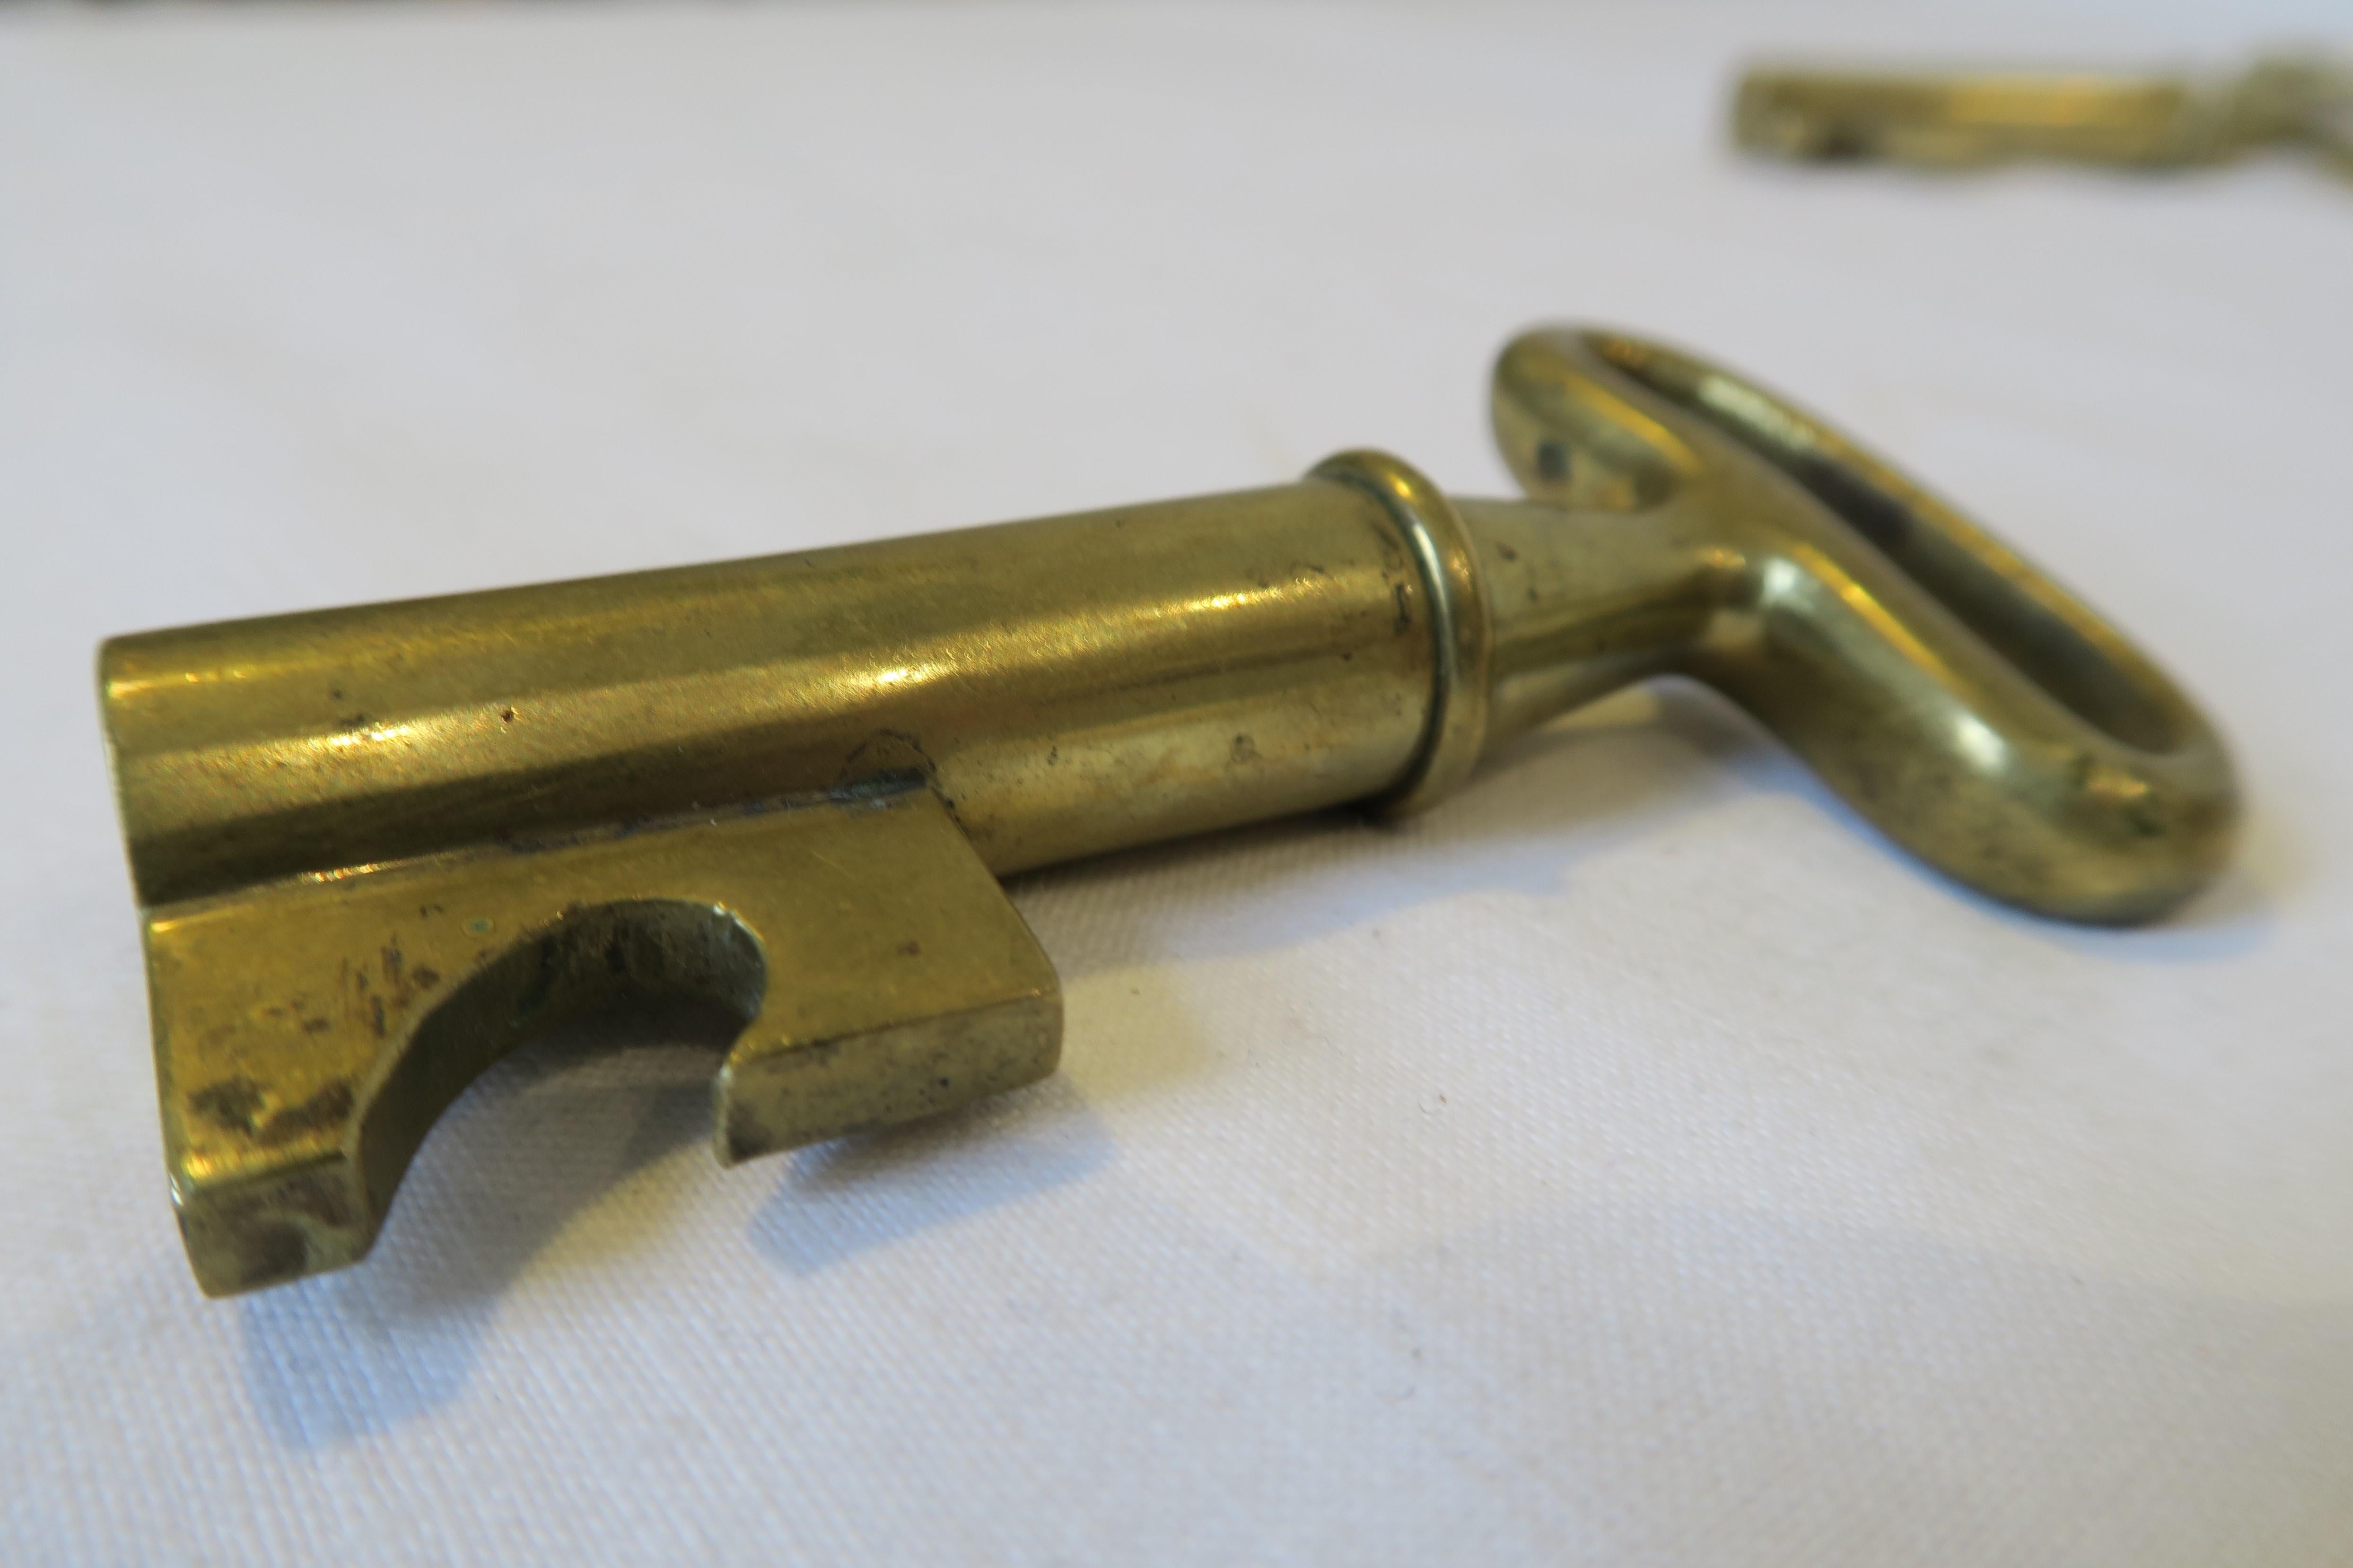 For sale is a beautiful bottle opener in key shape. It was crafted from brass and designed by the renowned workshops of Carl Auböck in Austria. The item represents the typical reduced style of the 50s and German Bauhaus, where Auböck spent a part of